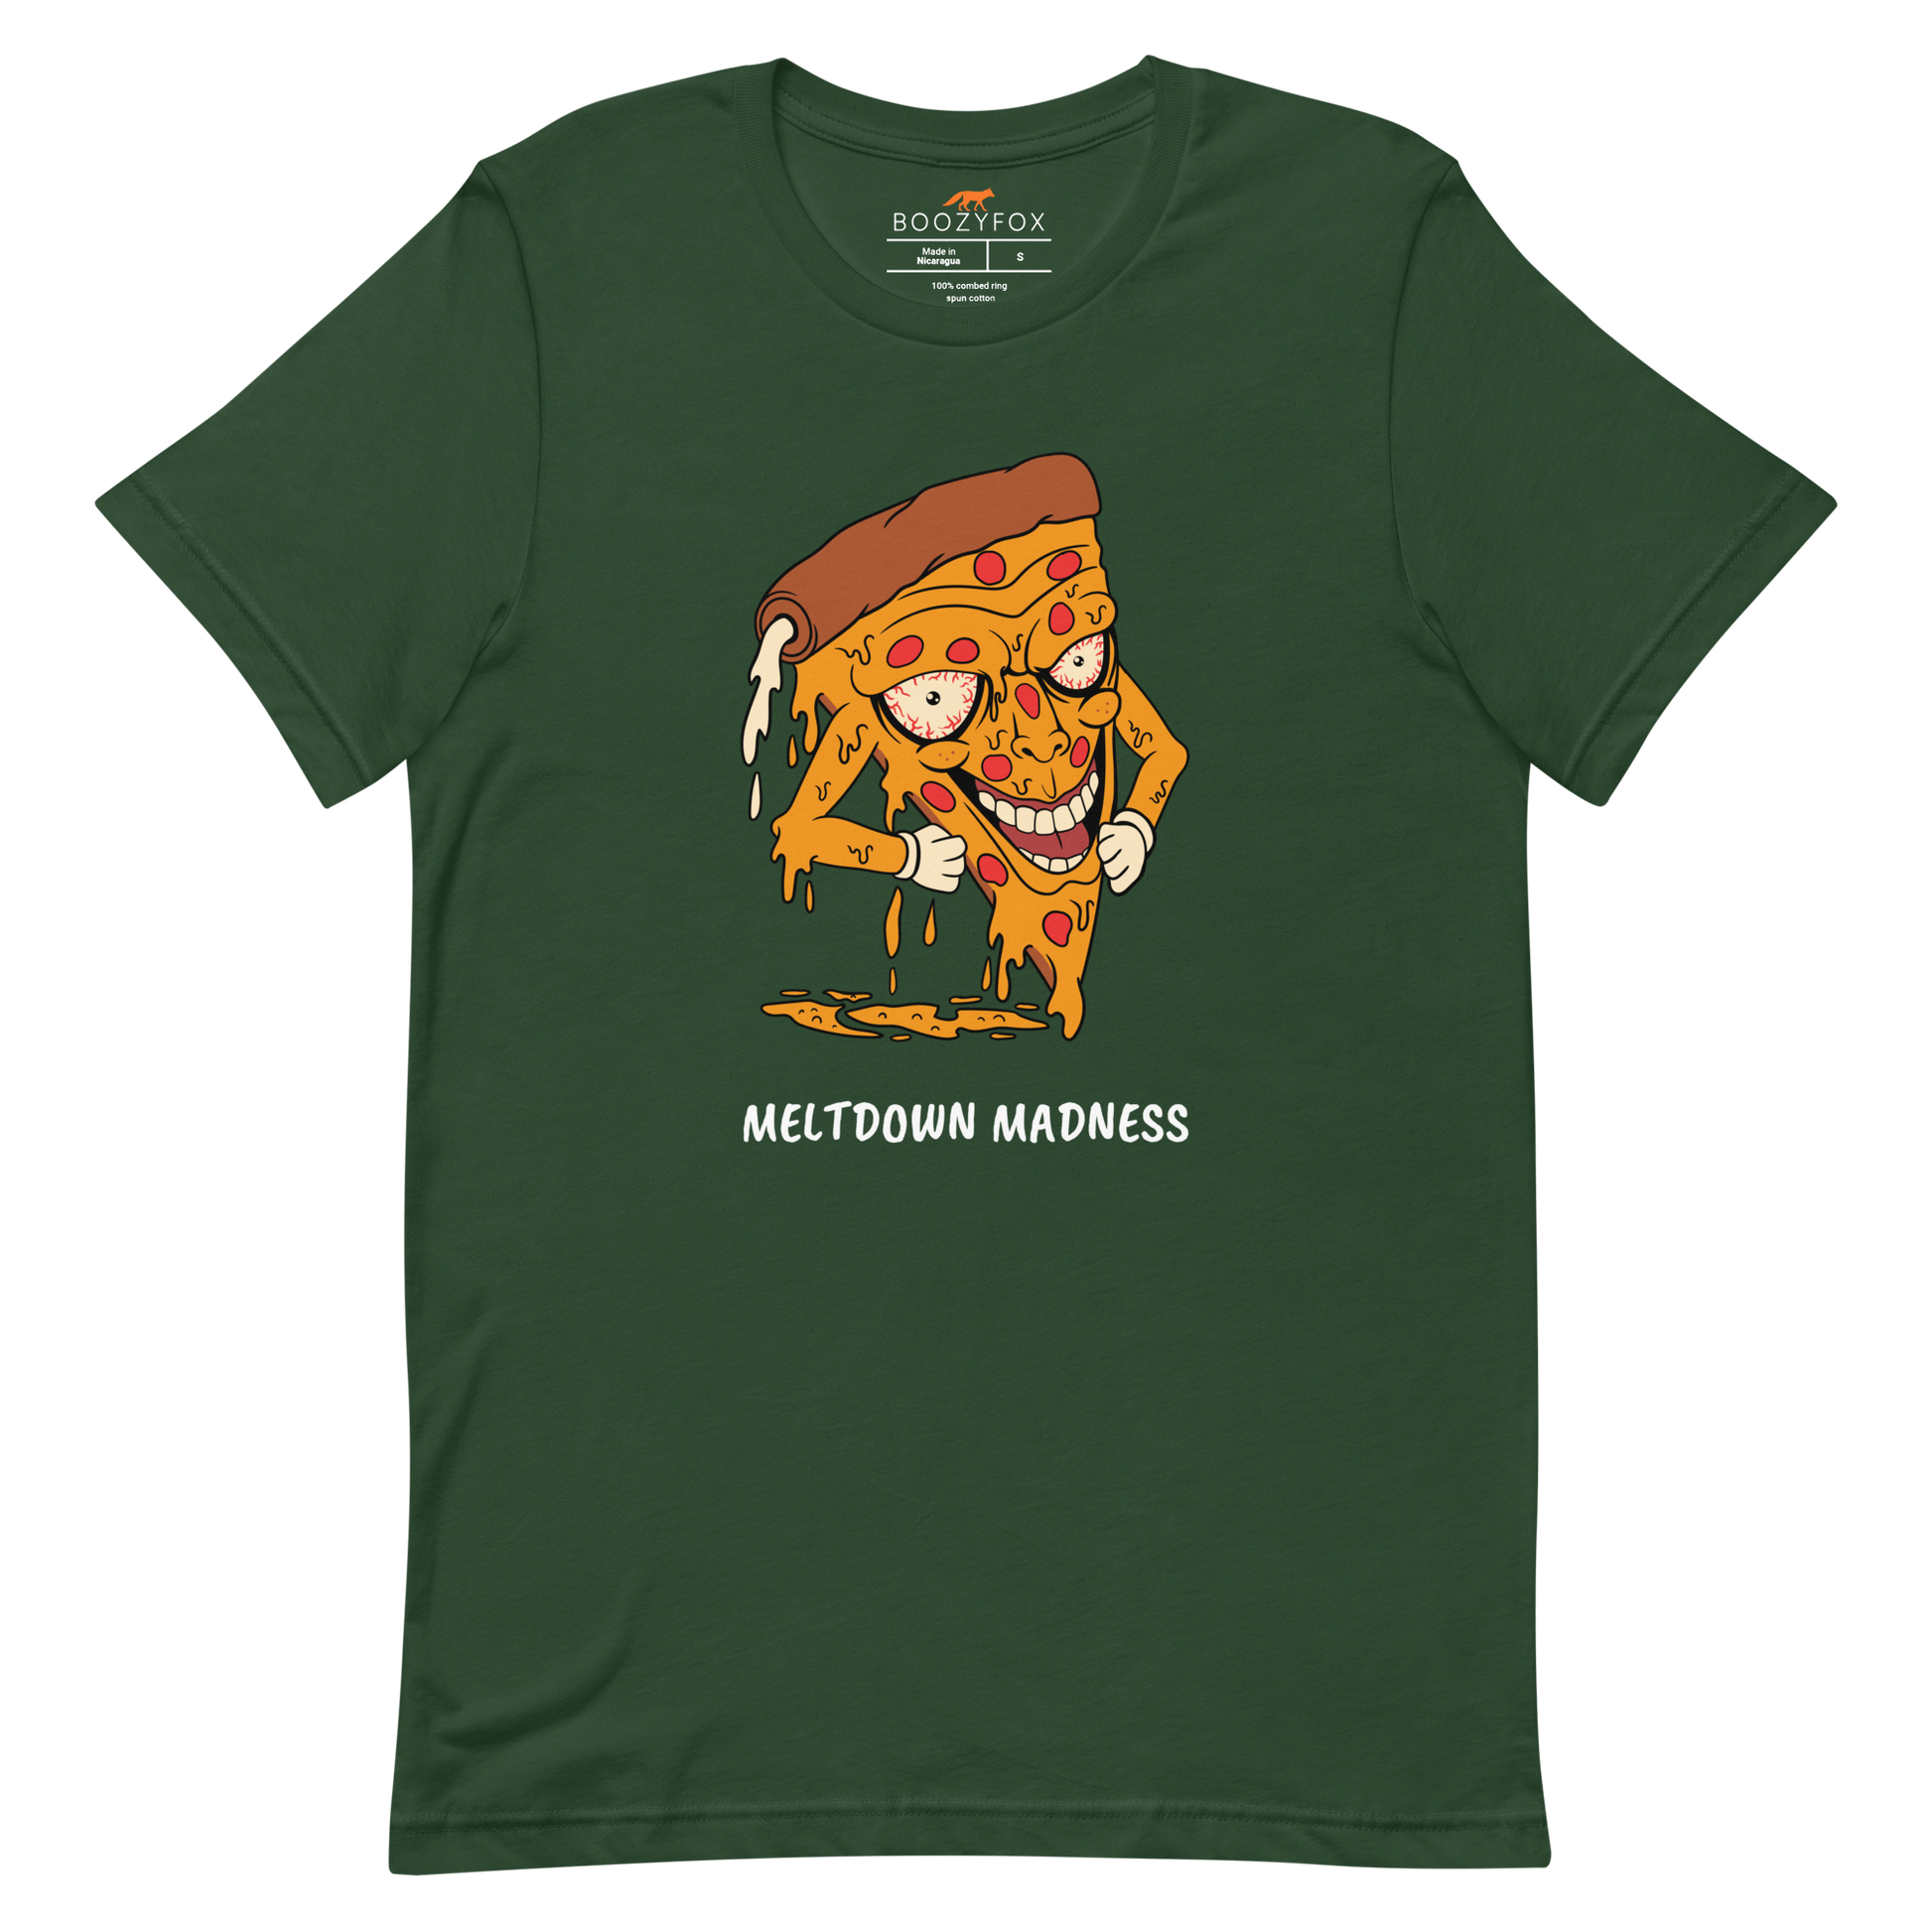 Forest Green Premium Melting Pizza Tee featuring a Meltdown Madness graphic on the chest - Funny Graphic Pizza Tees - Boozy Fox